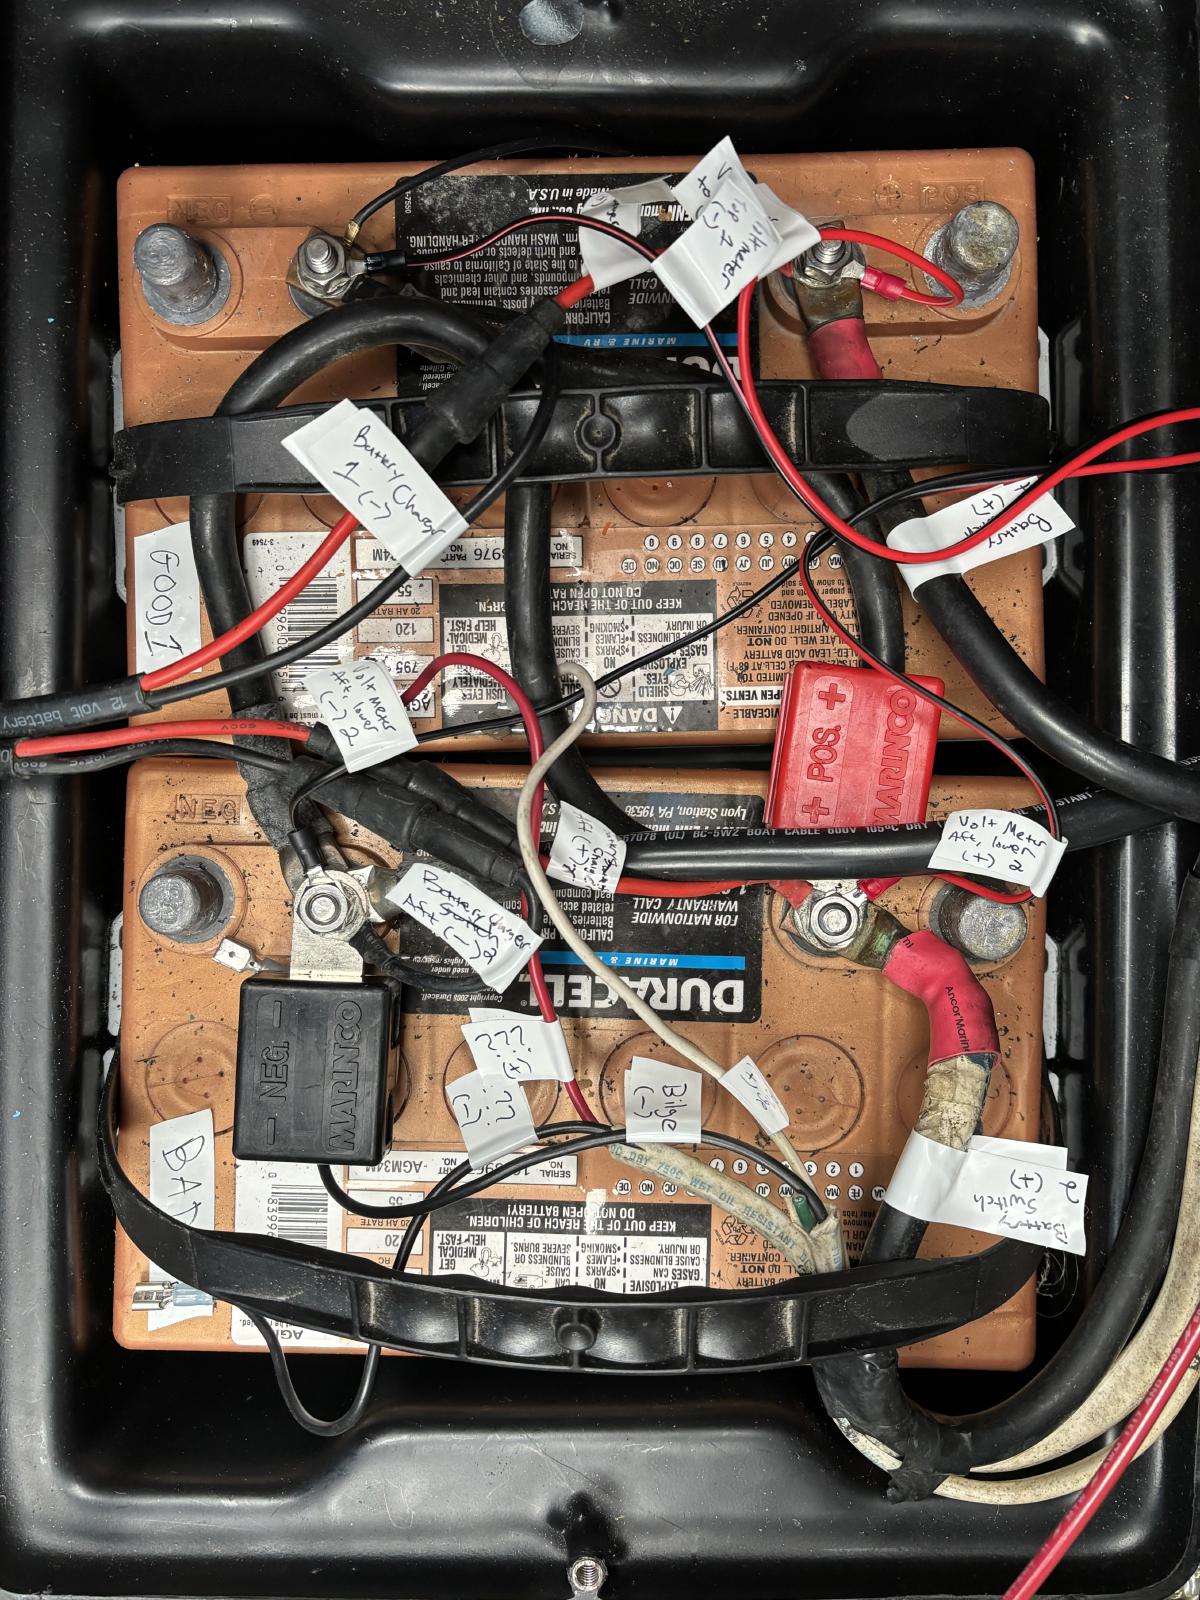 Labeled batteries